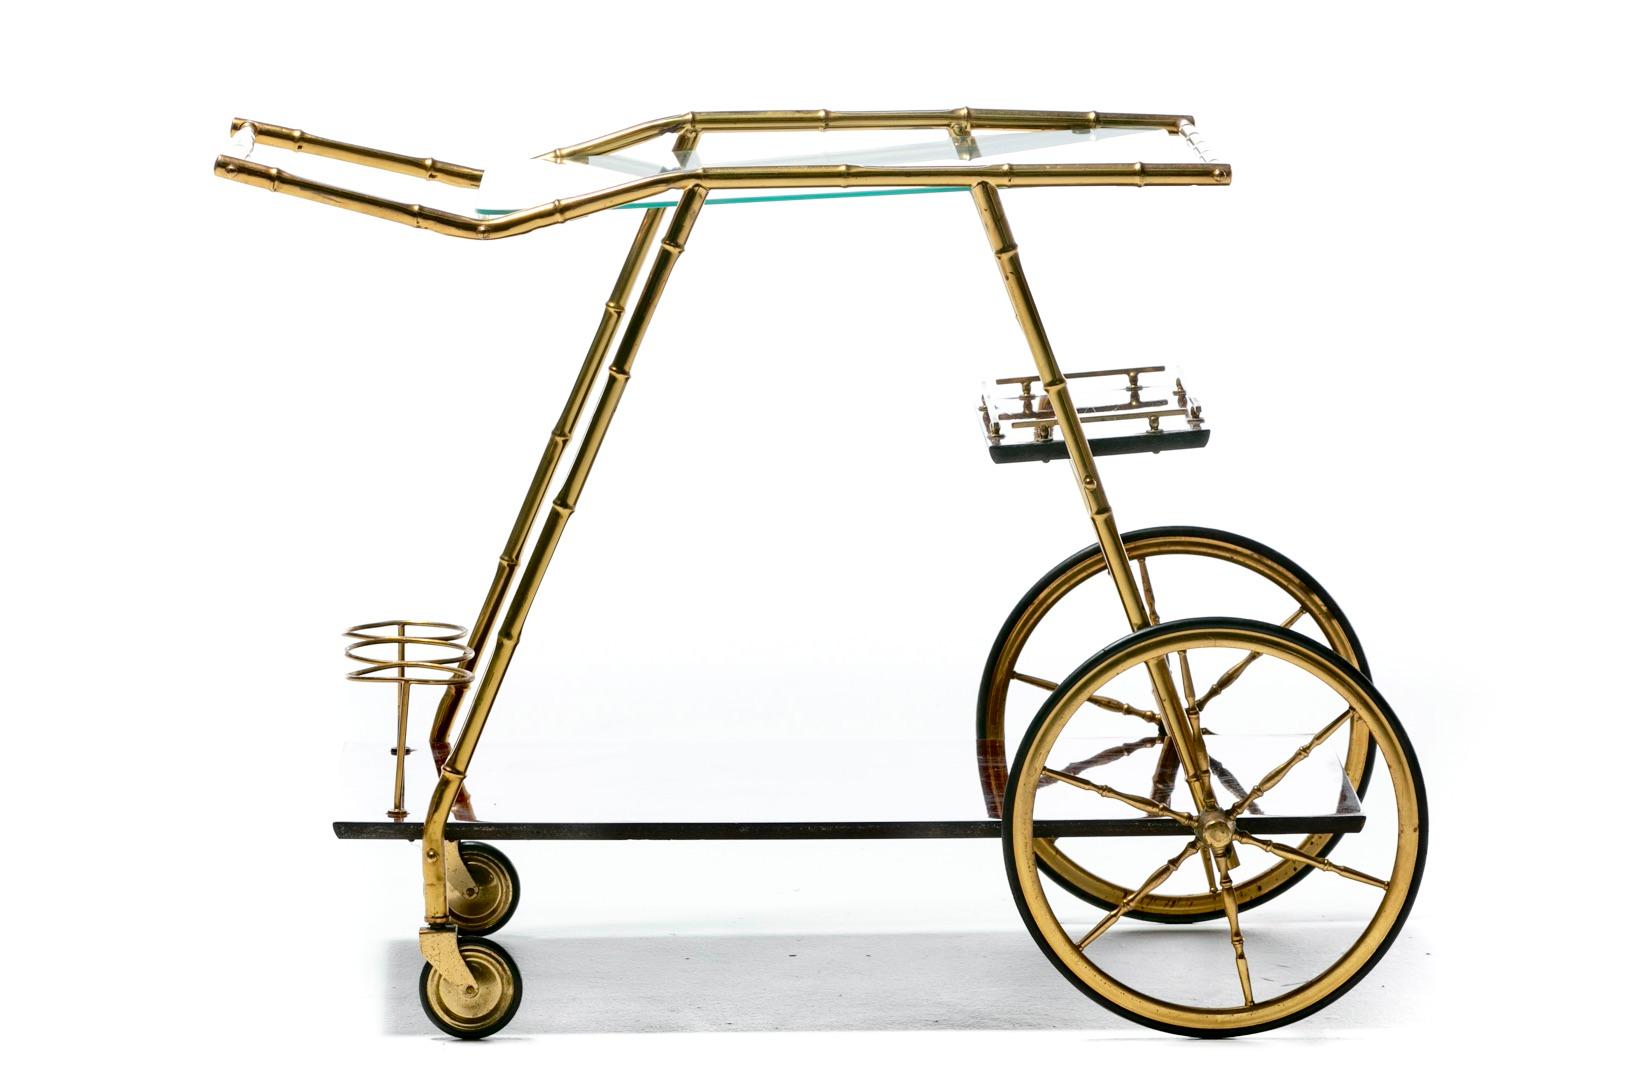 Roll into cocktail hour in style with this chic Italian Hollywood Regency brass bar cart. The details. Brass frame with faux bamboo detailing. Glass top shelf is perfect for displaying a sexy set of cocktail glasses and cleans up easily while